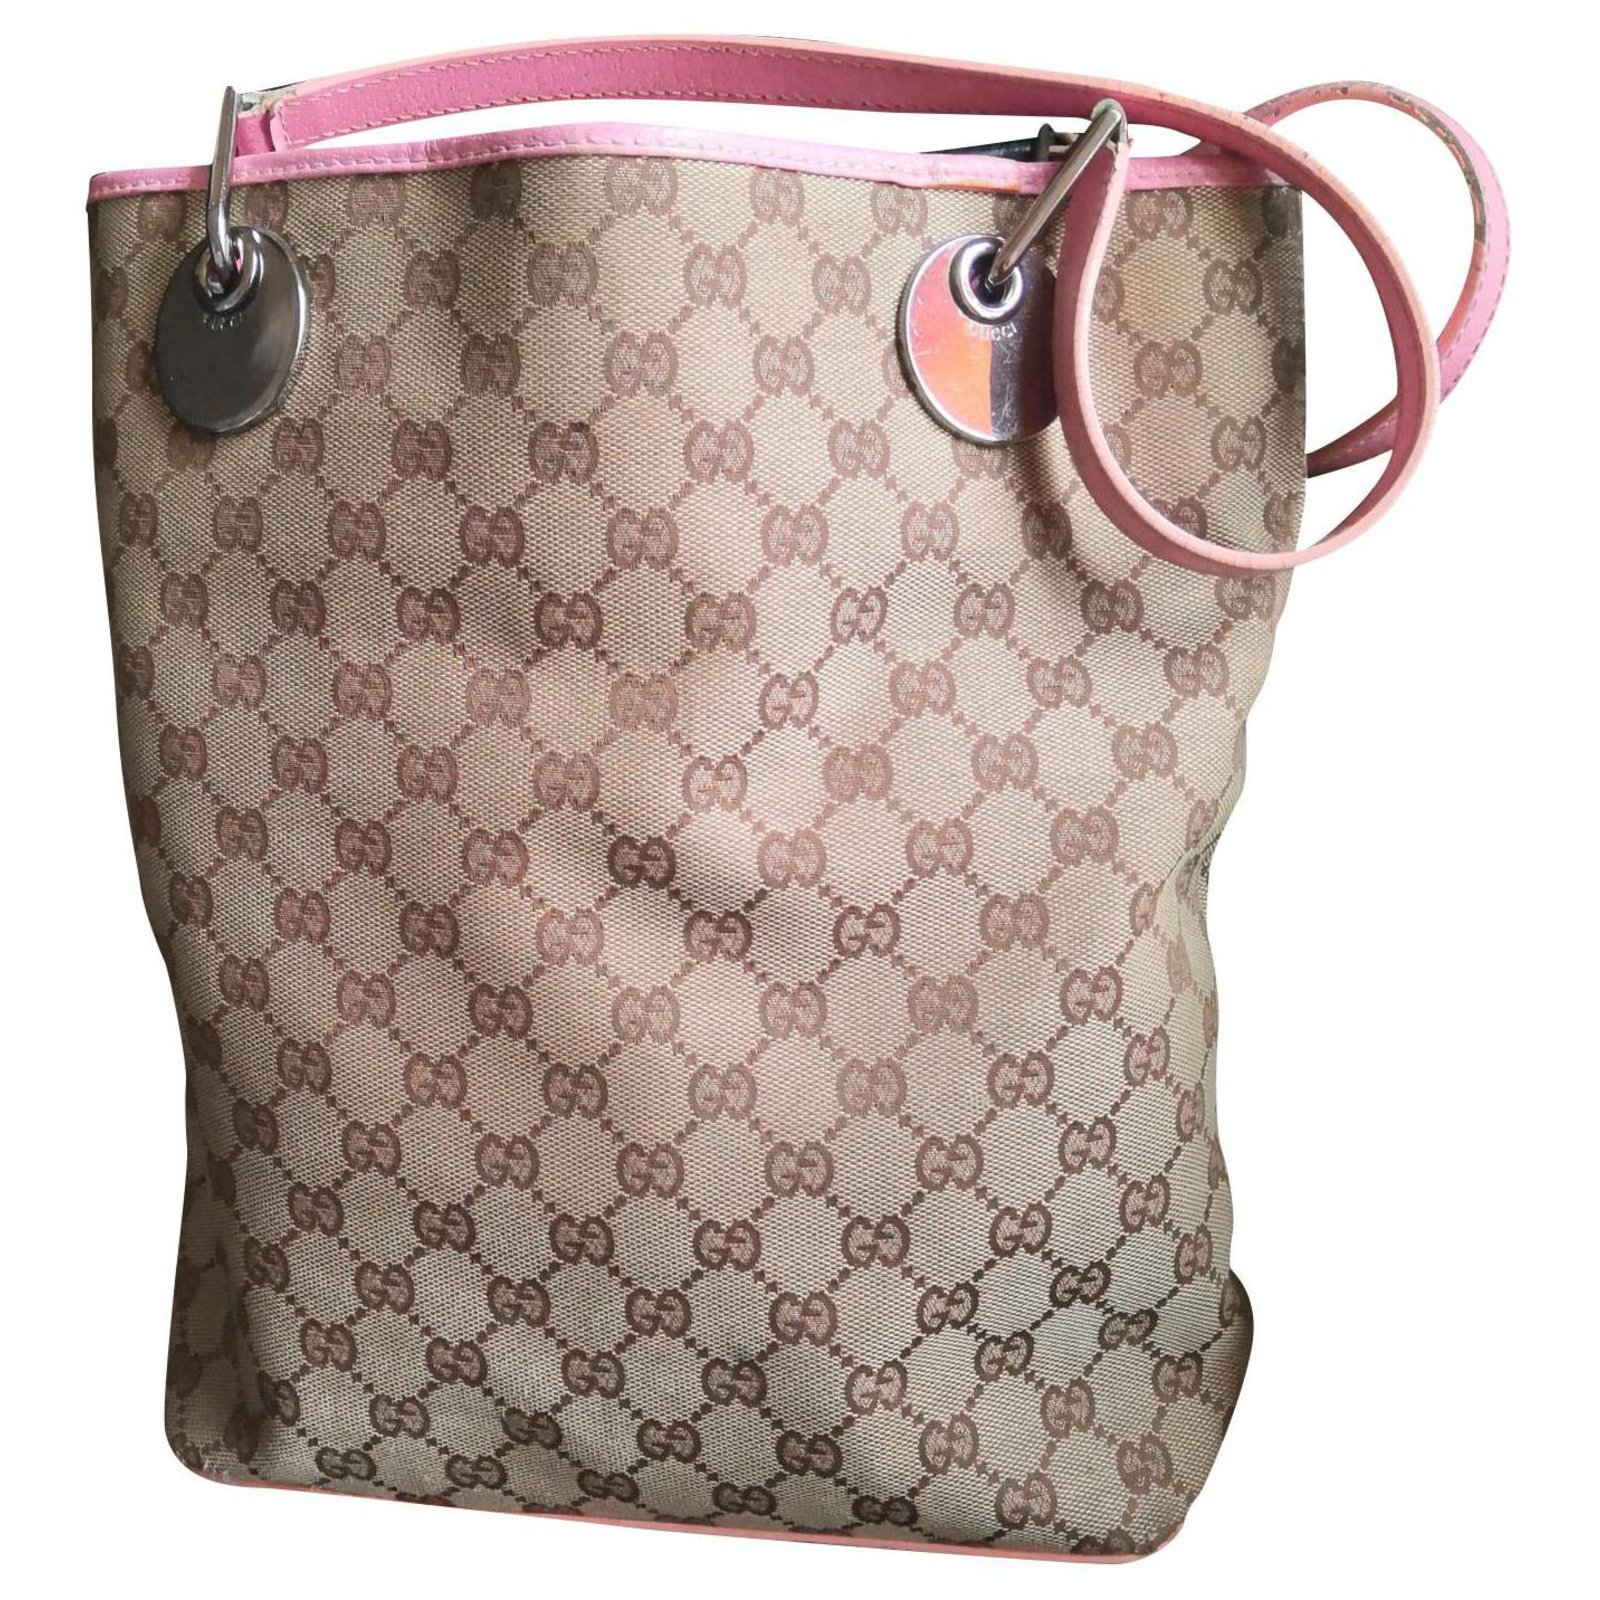 pink leather gucci purse